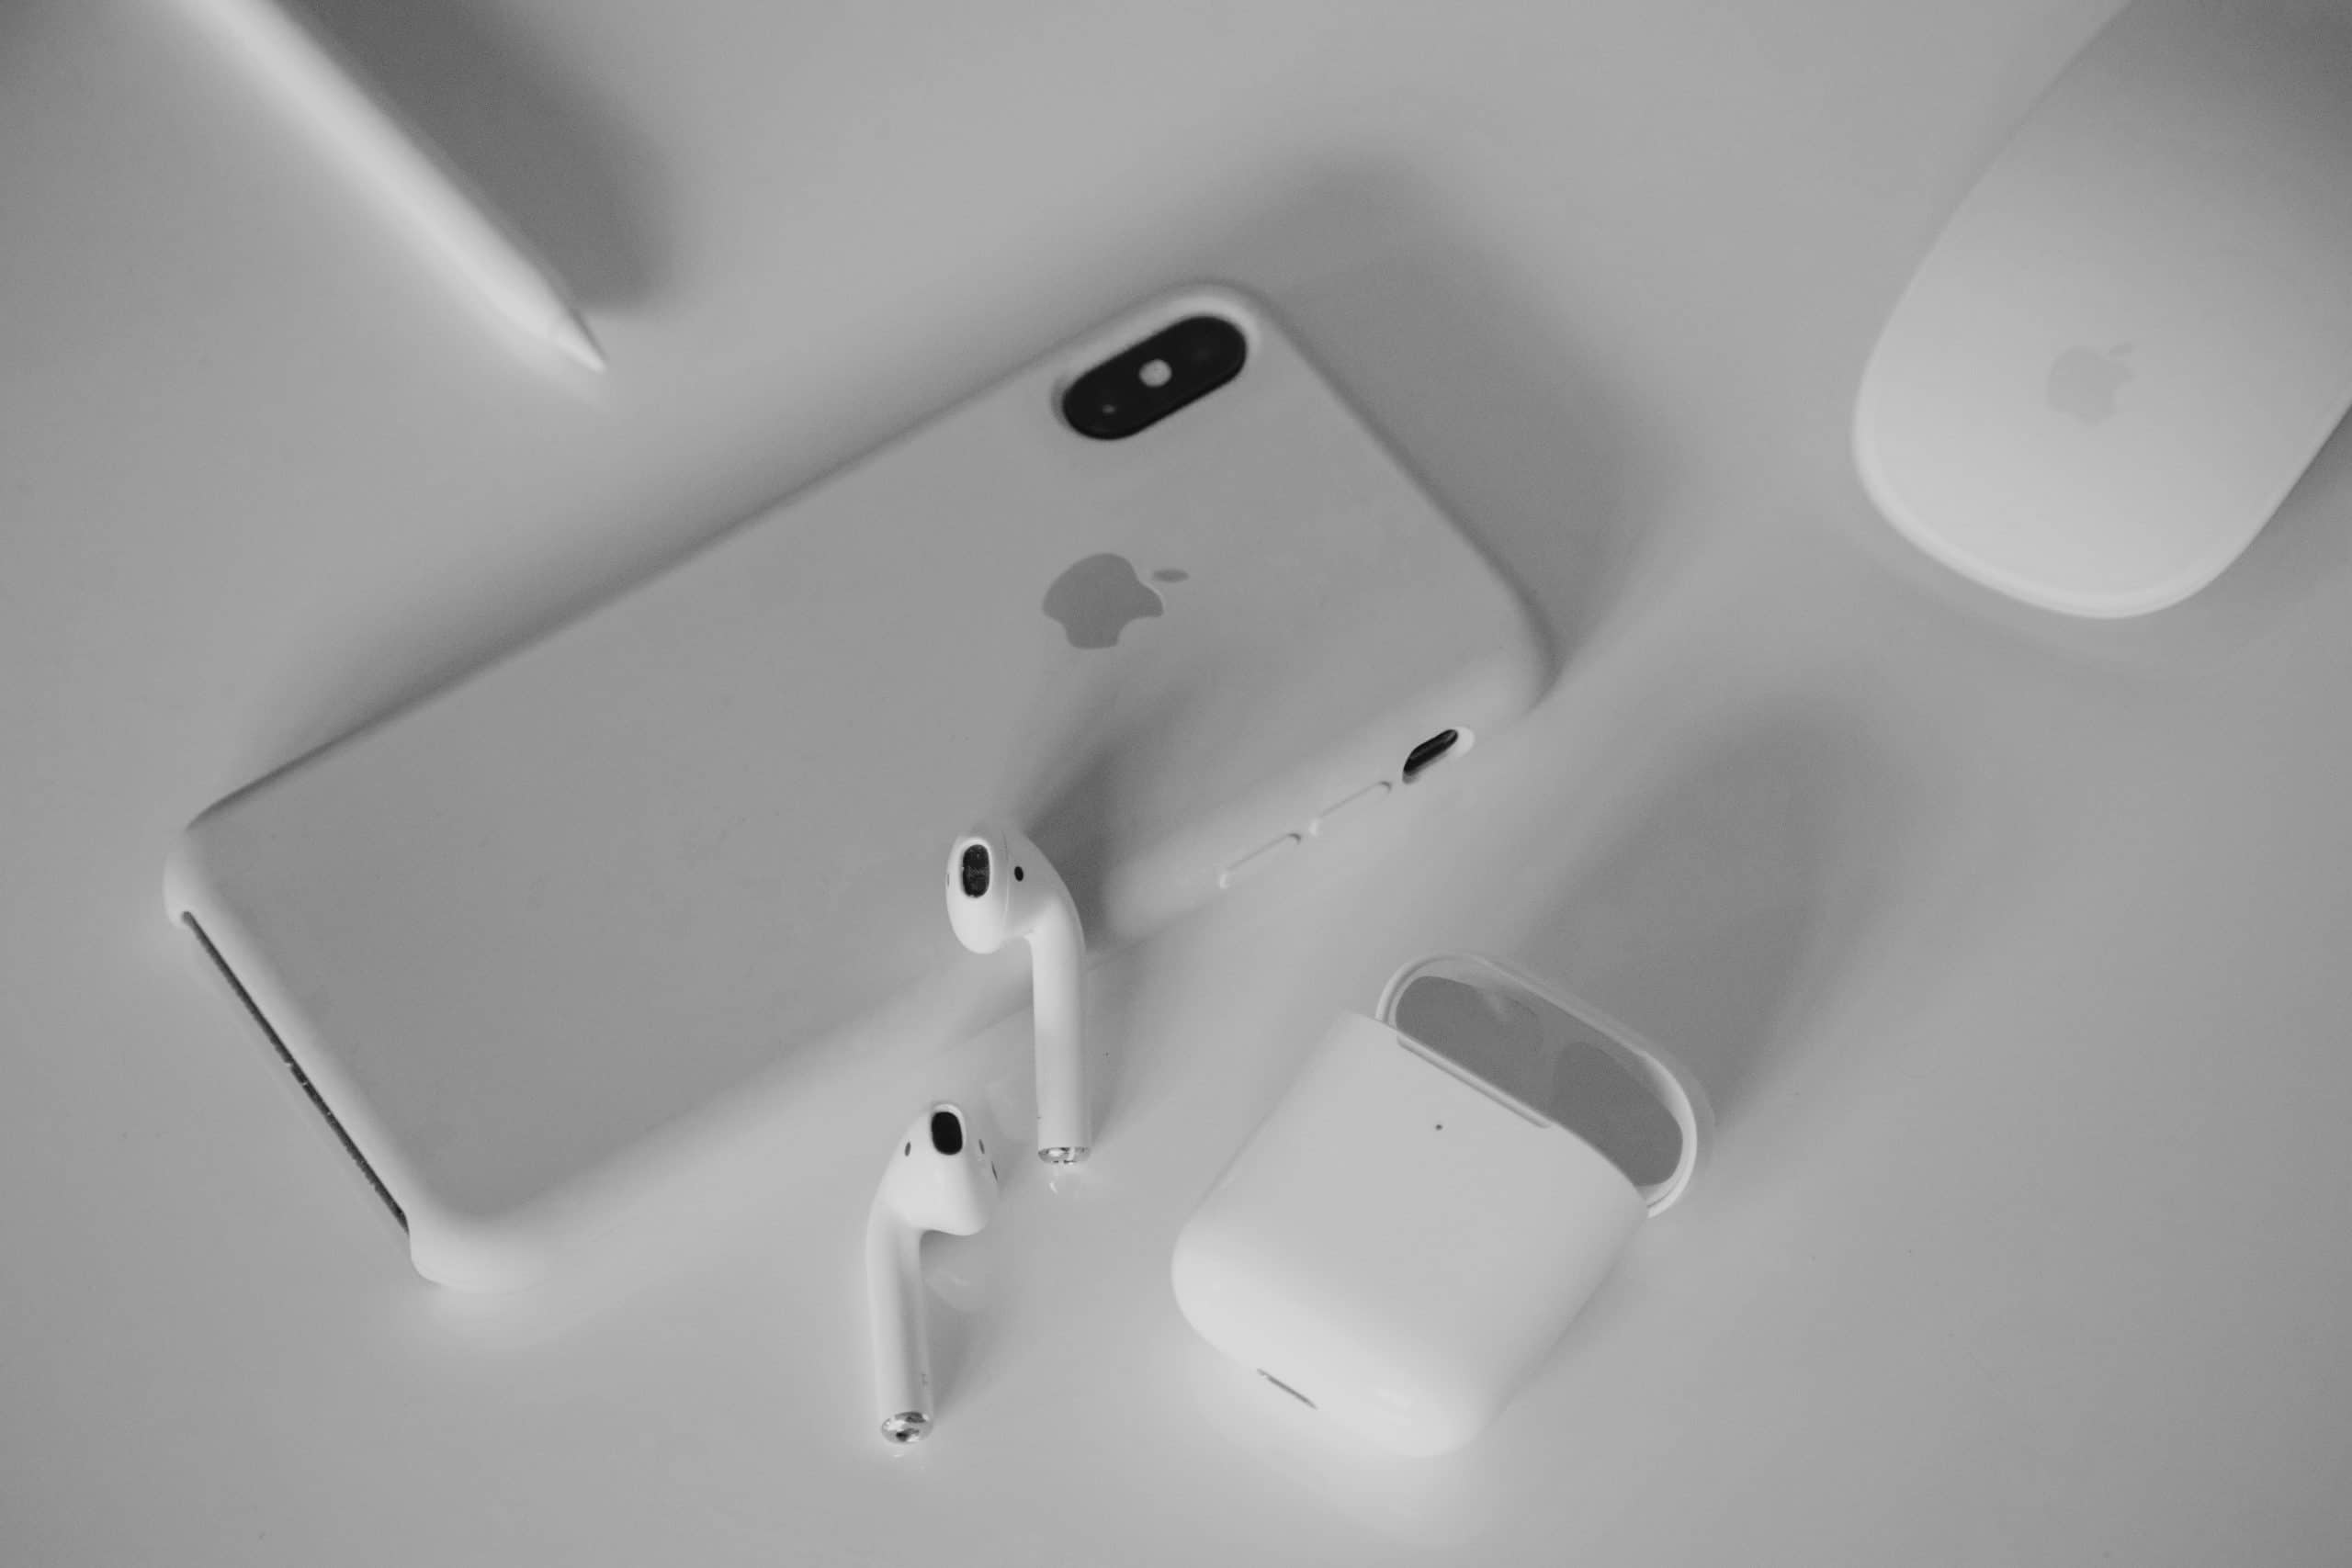 An iPhone Xs Max next to a pair of Airpods